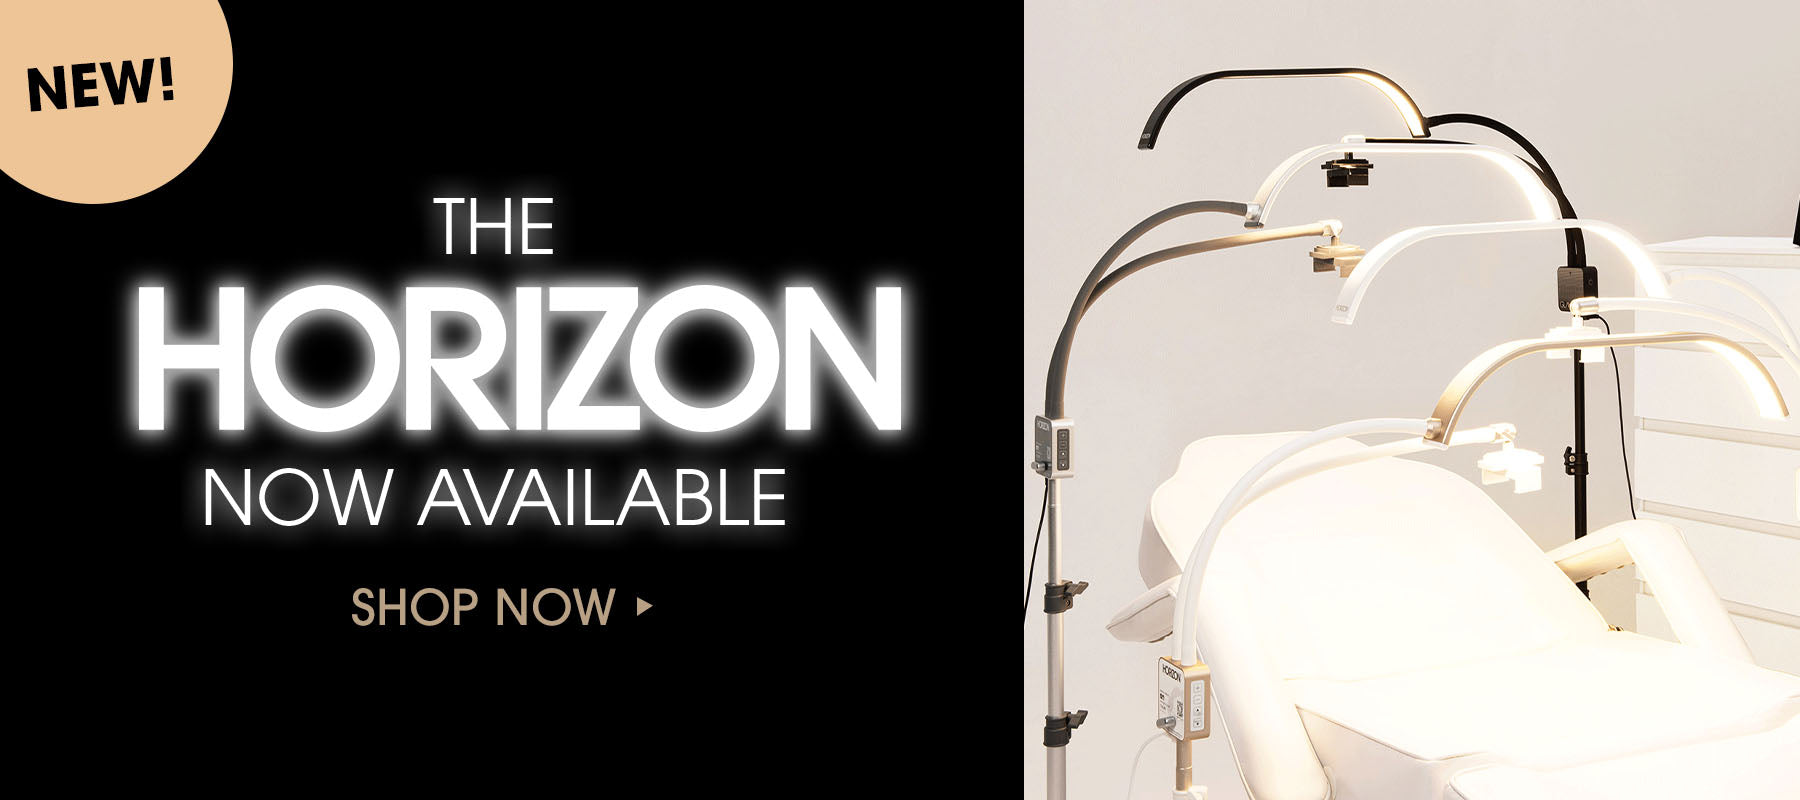 THE HORIZON NOW AVAILABLE